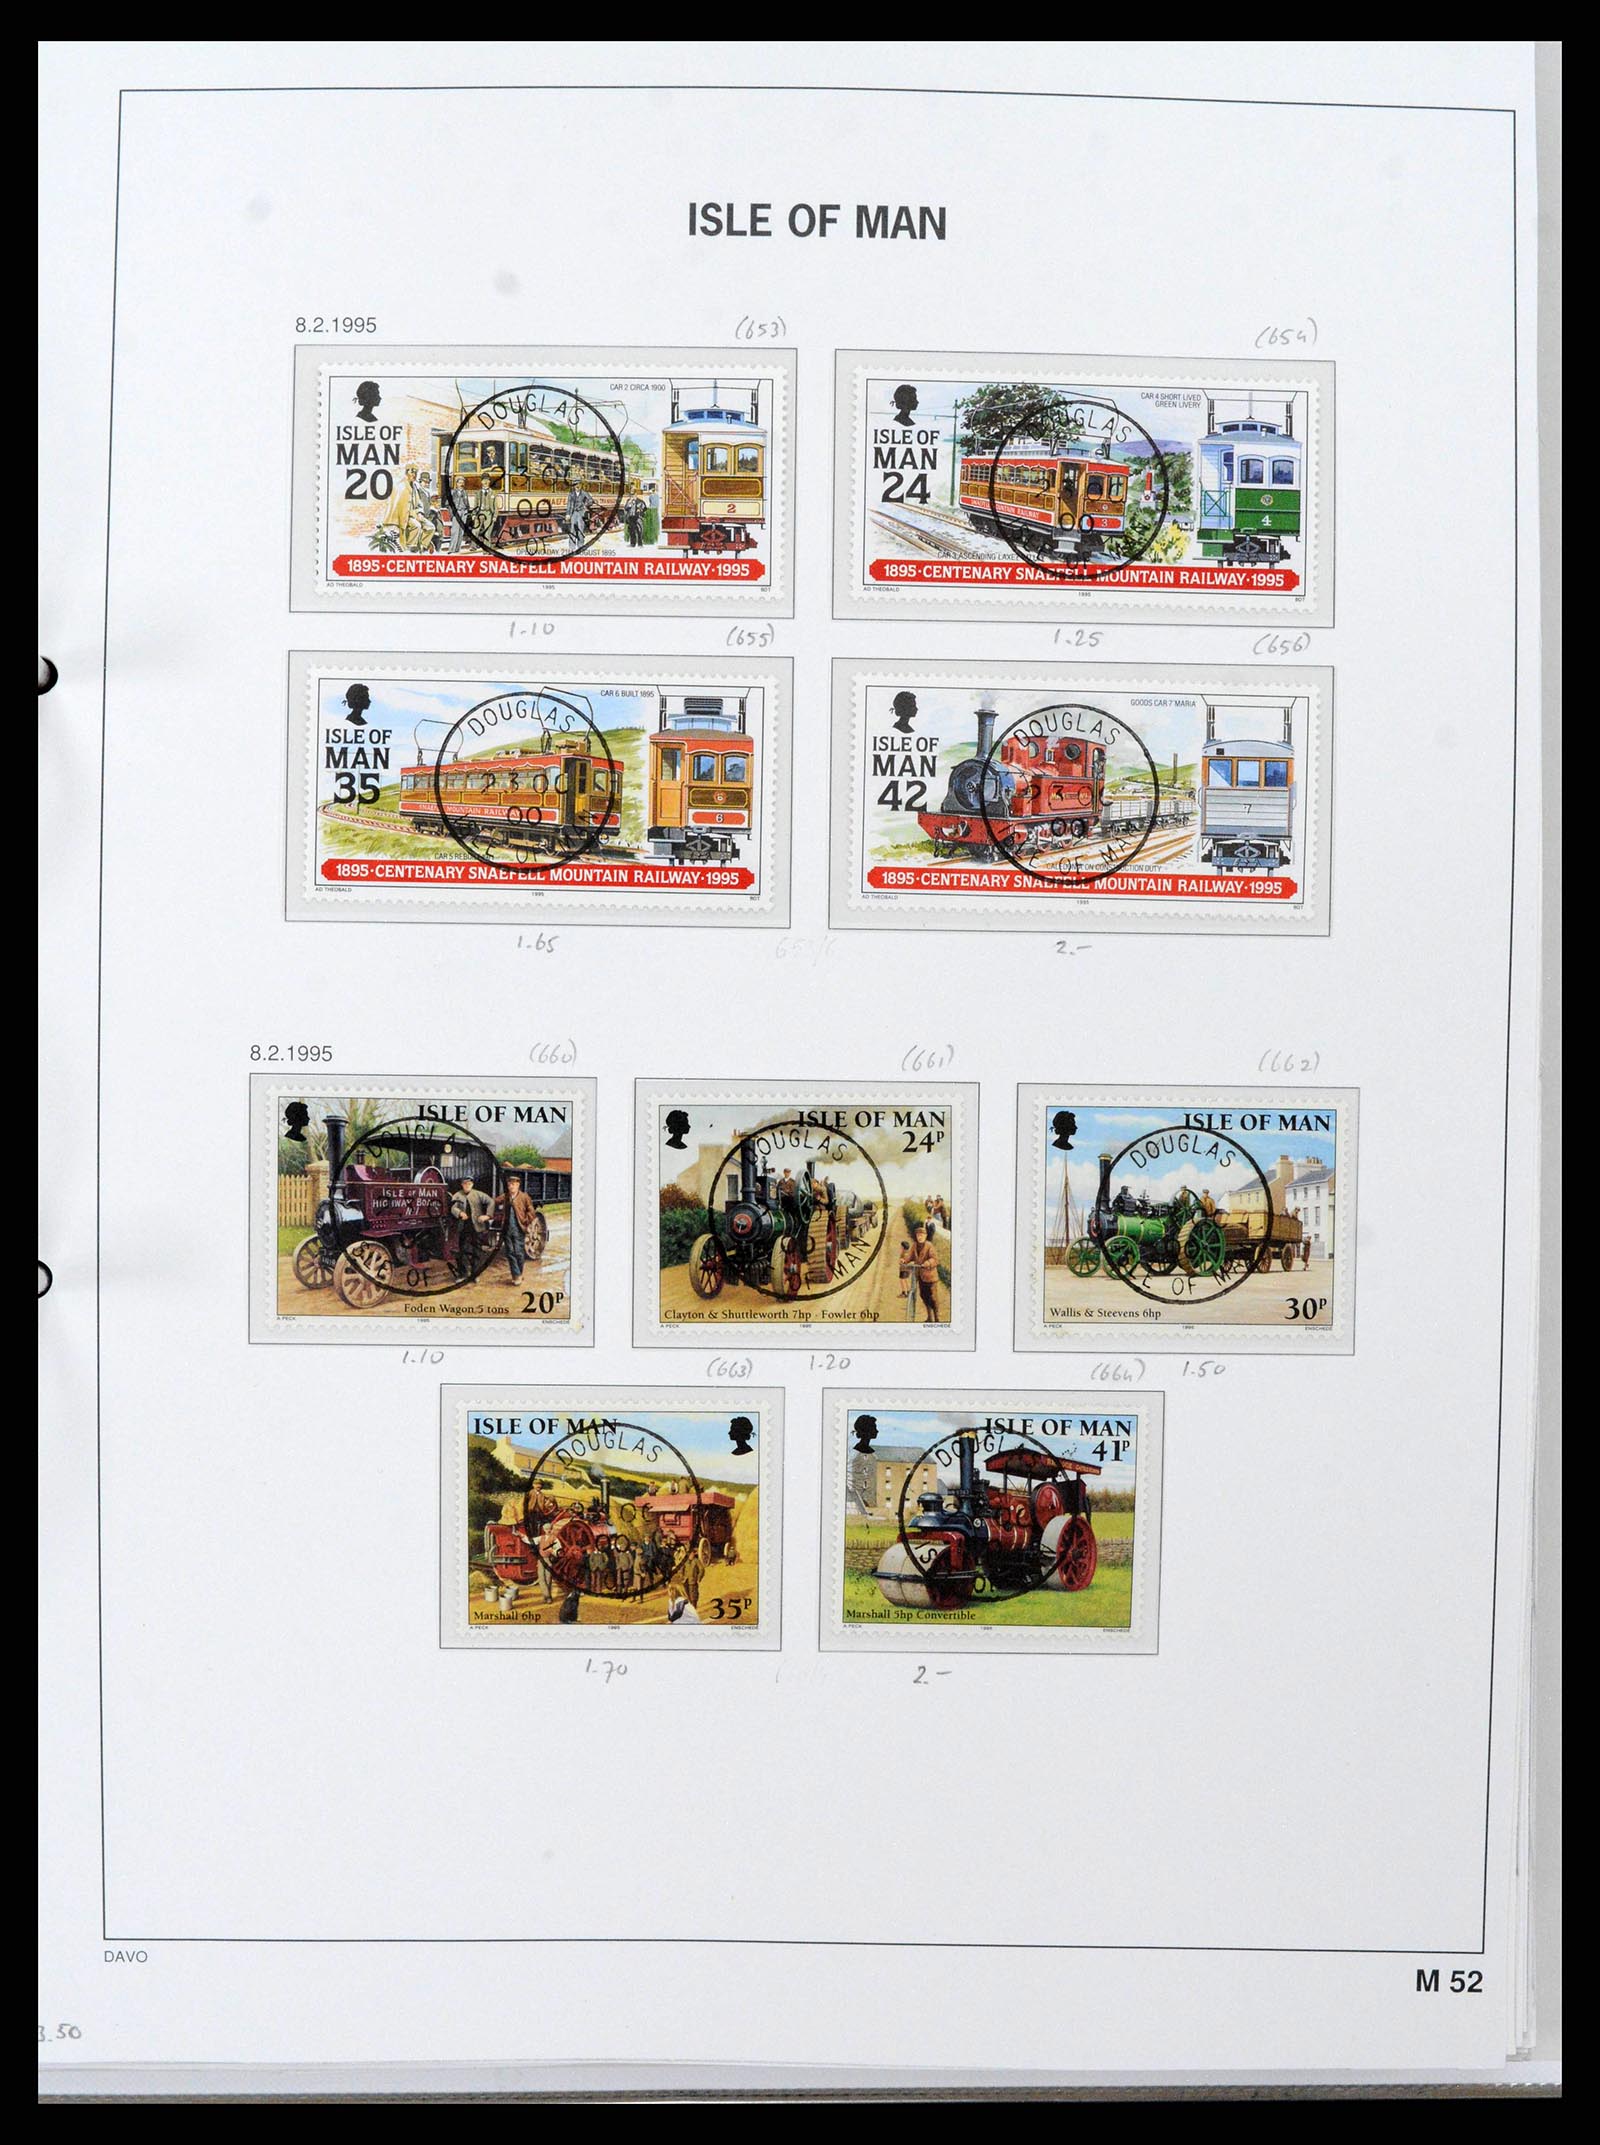 38659 0060 - Stamp collection 38659 Isle of Man 1973-2005.